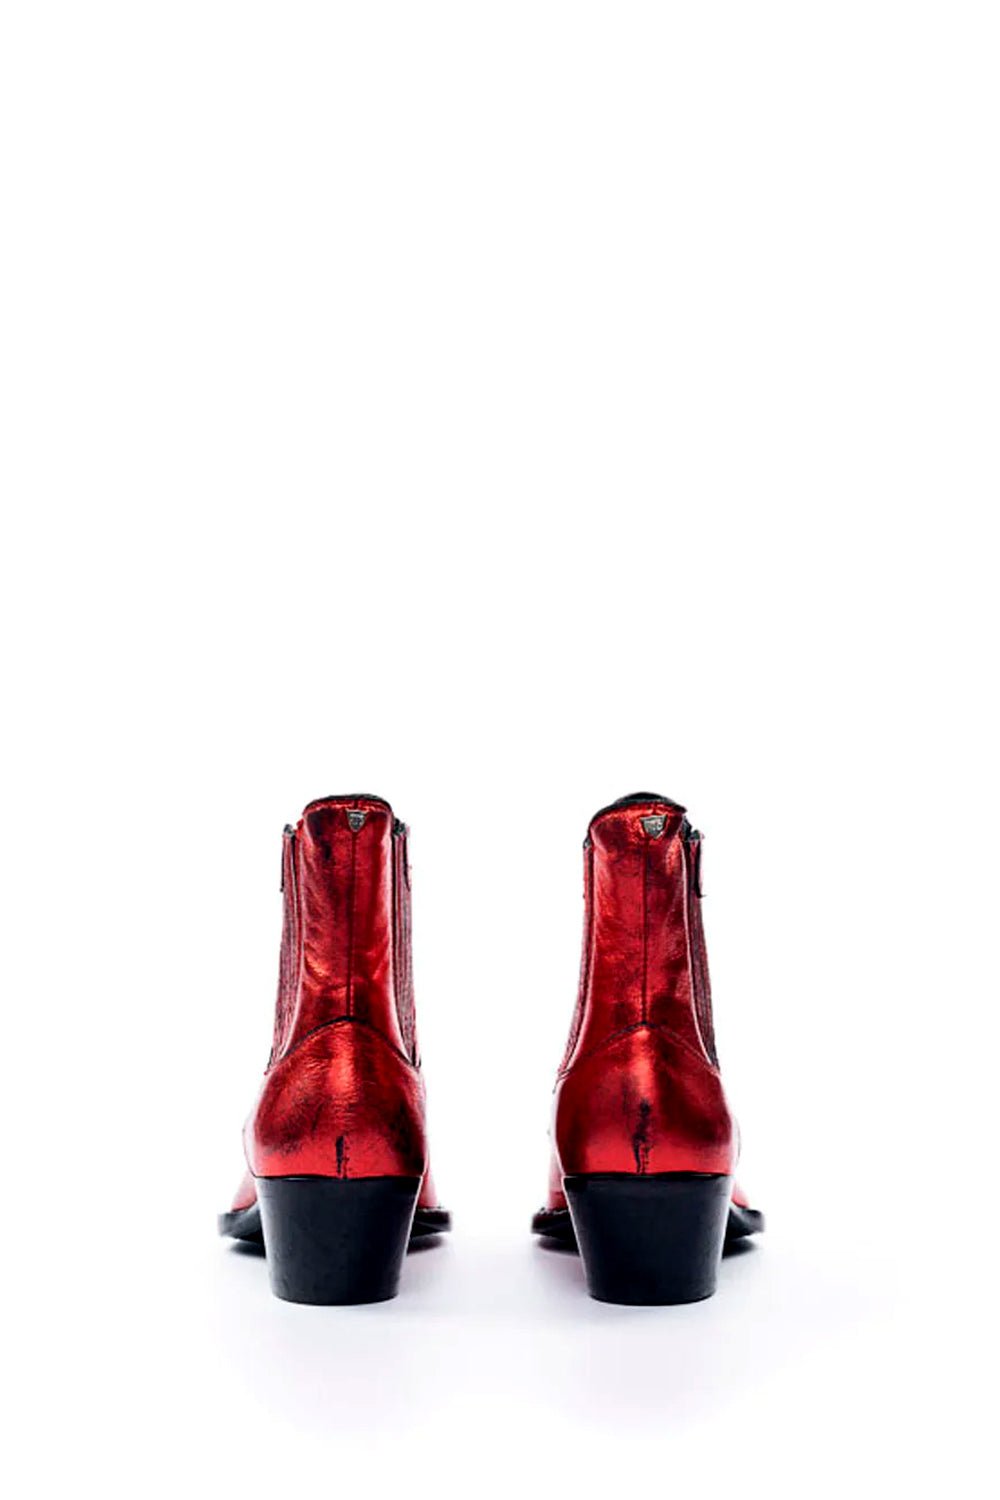 LOW CHELSEA BOOT Red metallic leather 'Texas' boots. Squared metal tip. Elastic closure on the sides. Heel height: 5 cm. Made in Italy. HTC LOS ANGELES